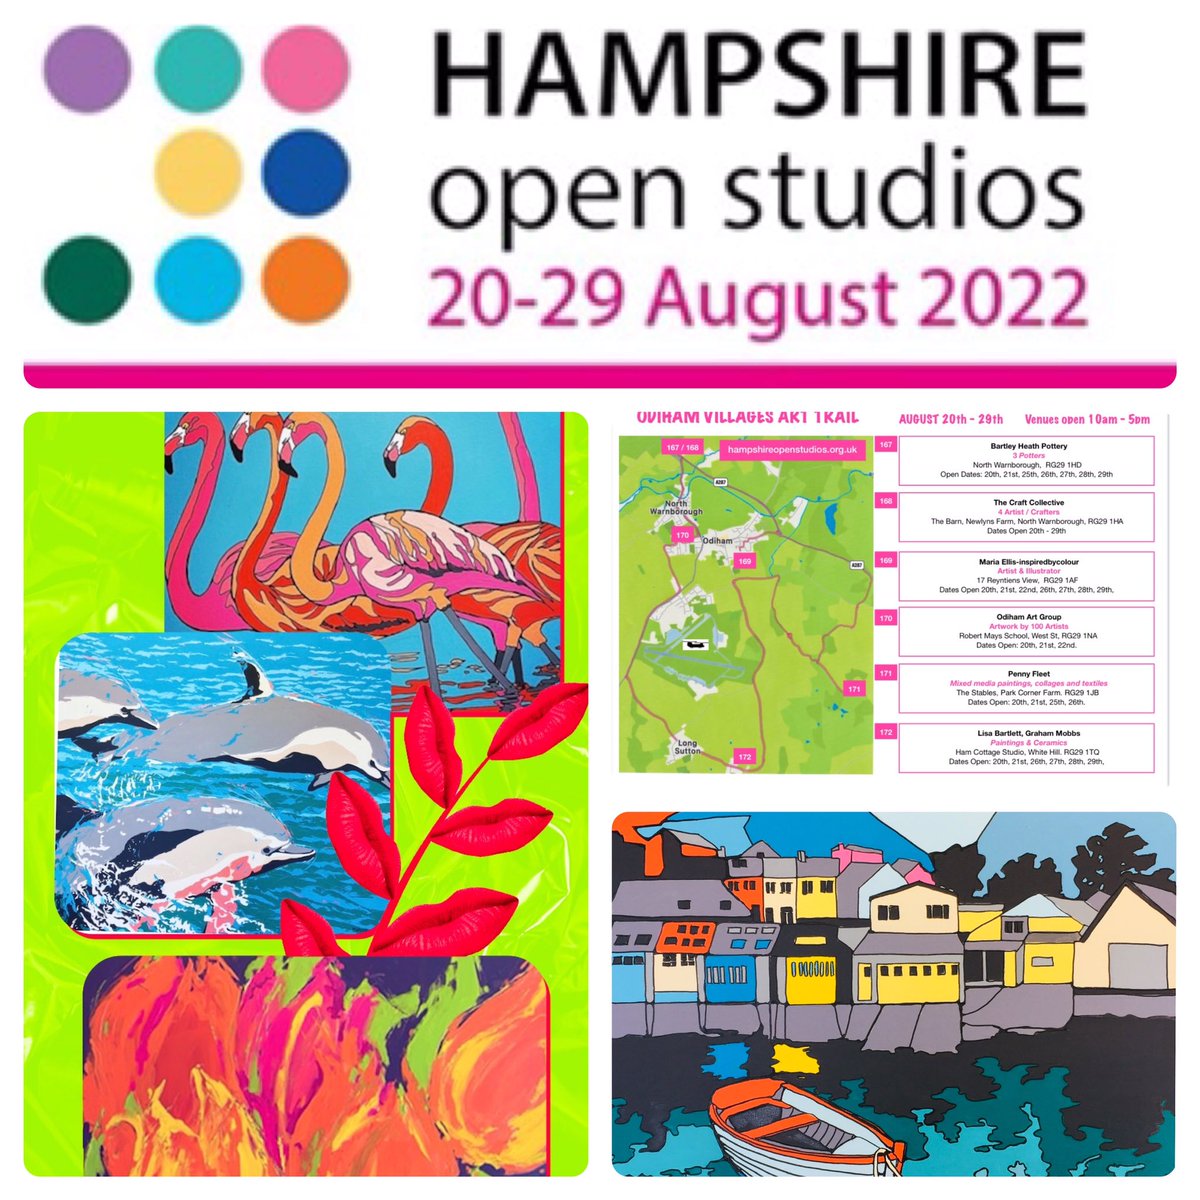 Hampshire Open Studios starts next weekend!
The Odiham Villages Art Trail, a group of artists in Odiham and the surrounding villages, including me ‘inspiredbycolour’ studio 169, will be open, and we are all so excited to meet you!